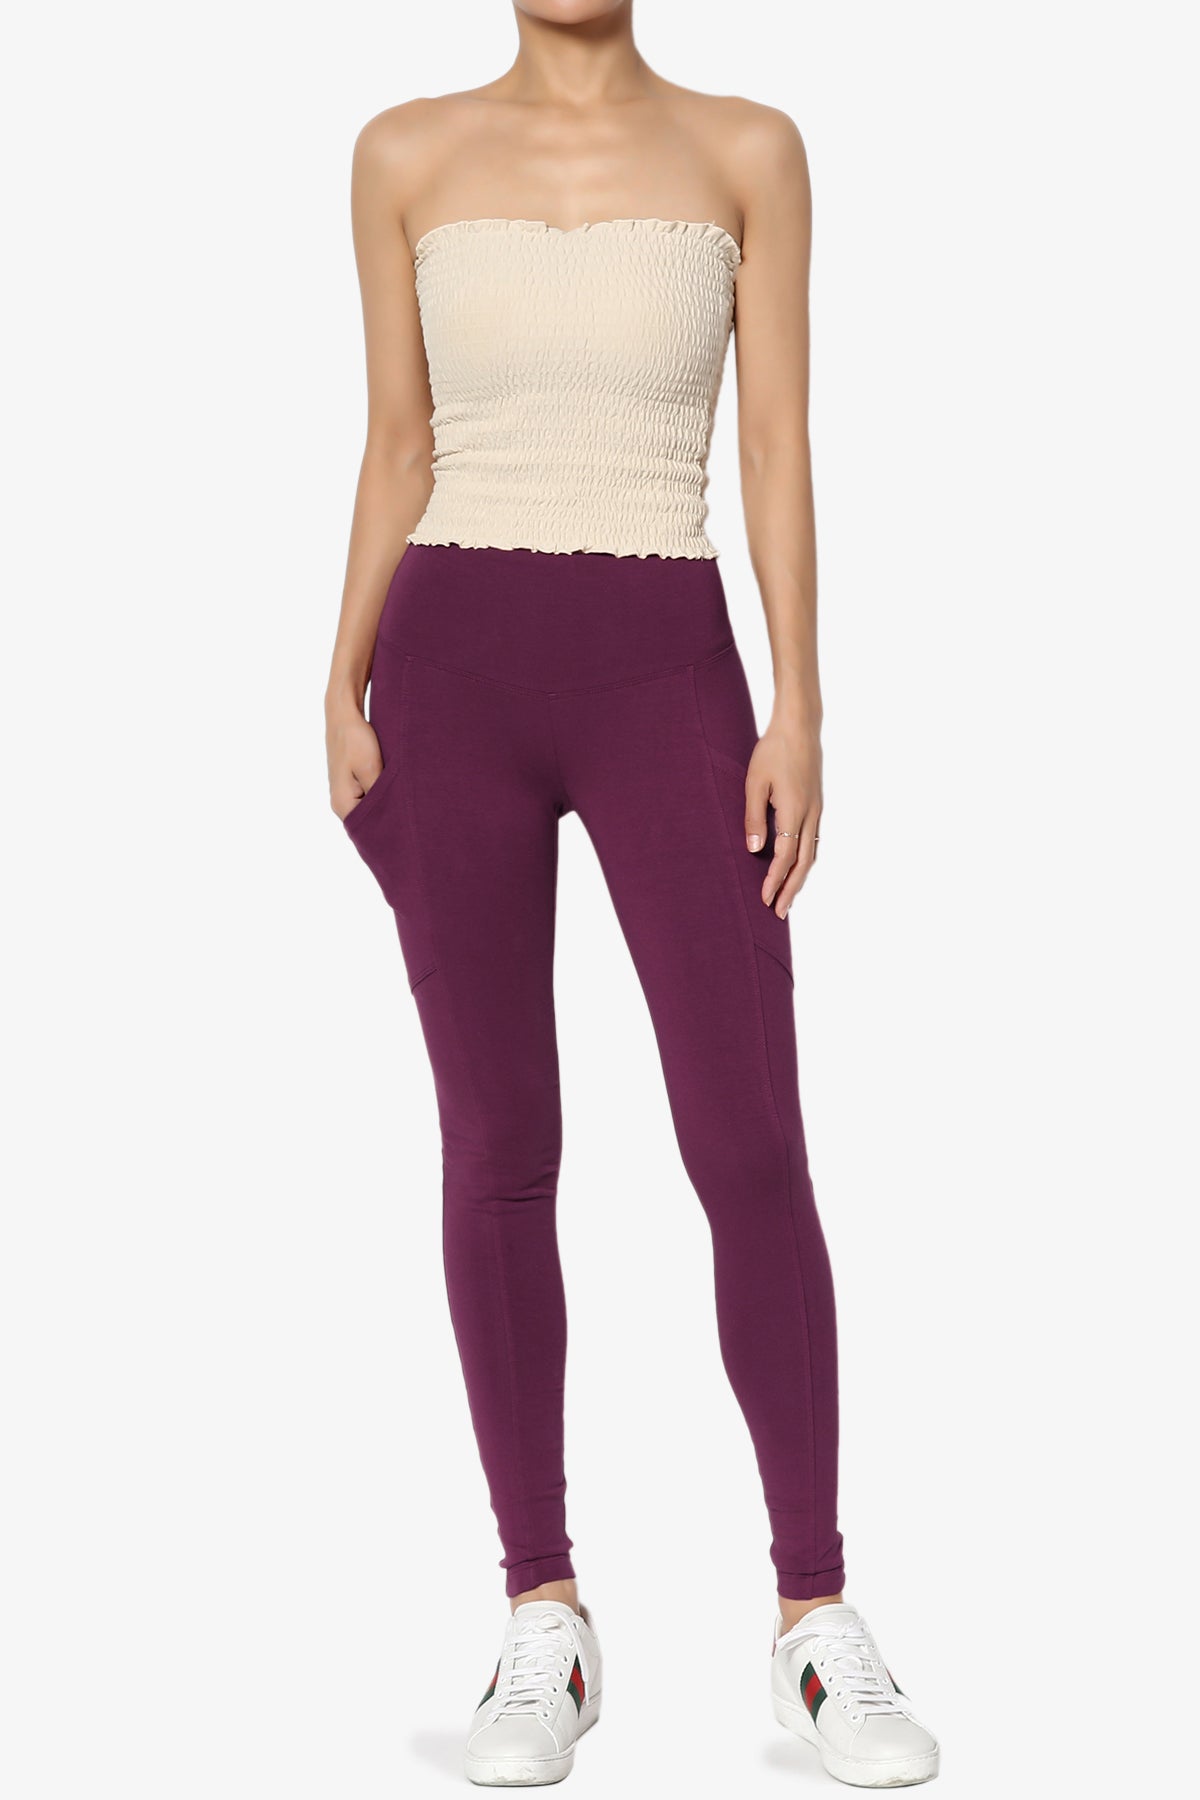 Ansley Luxe Cotton Leggings with Pockets DARK PLUM_6